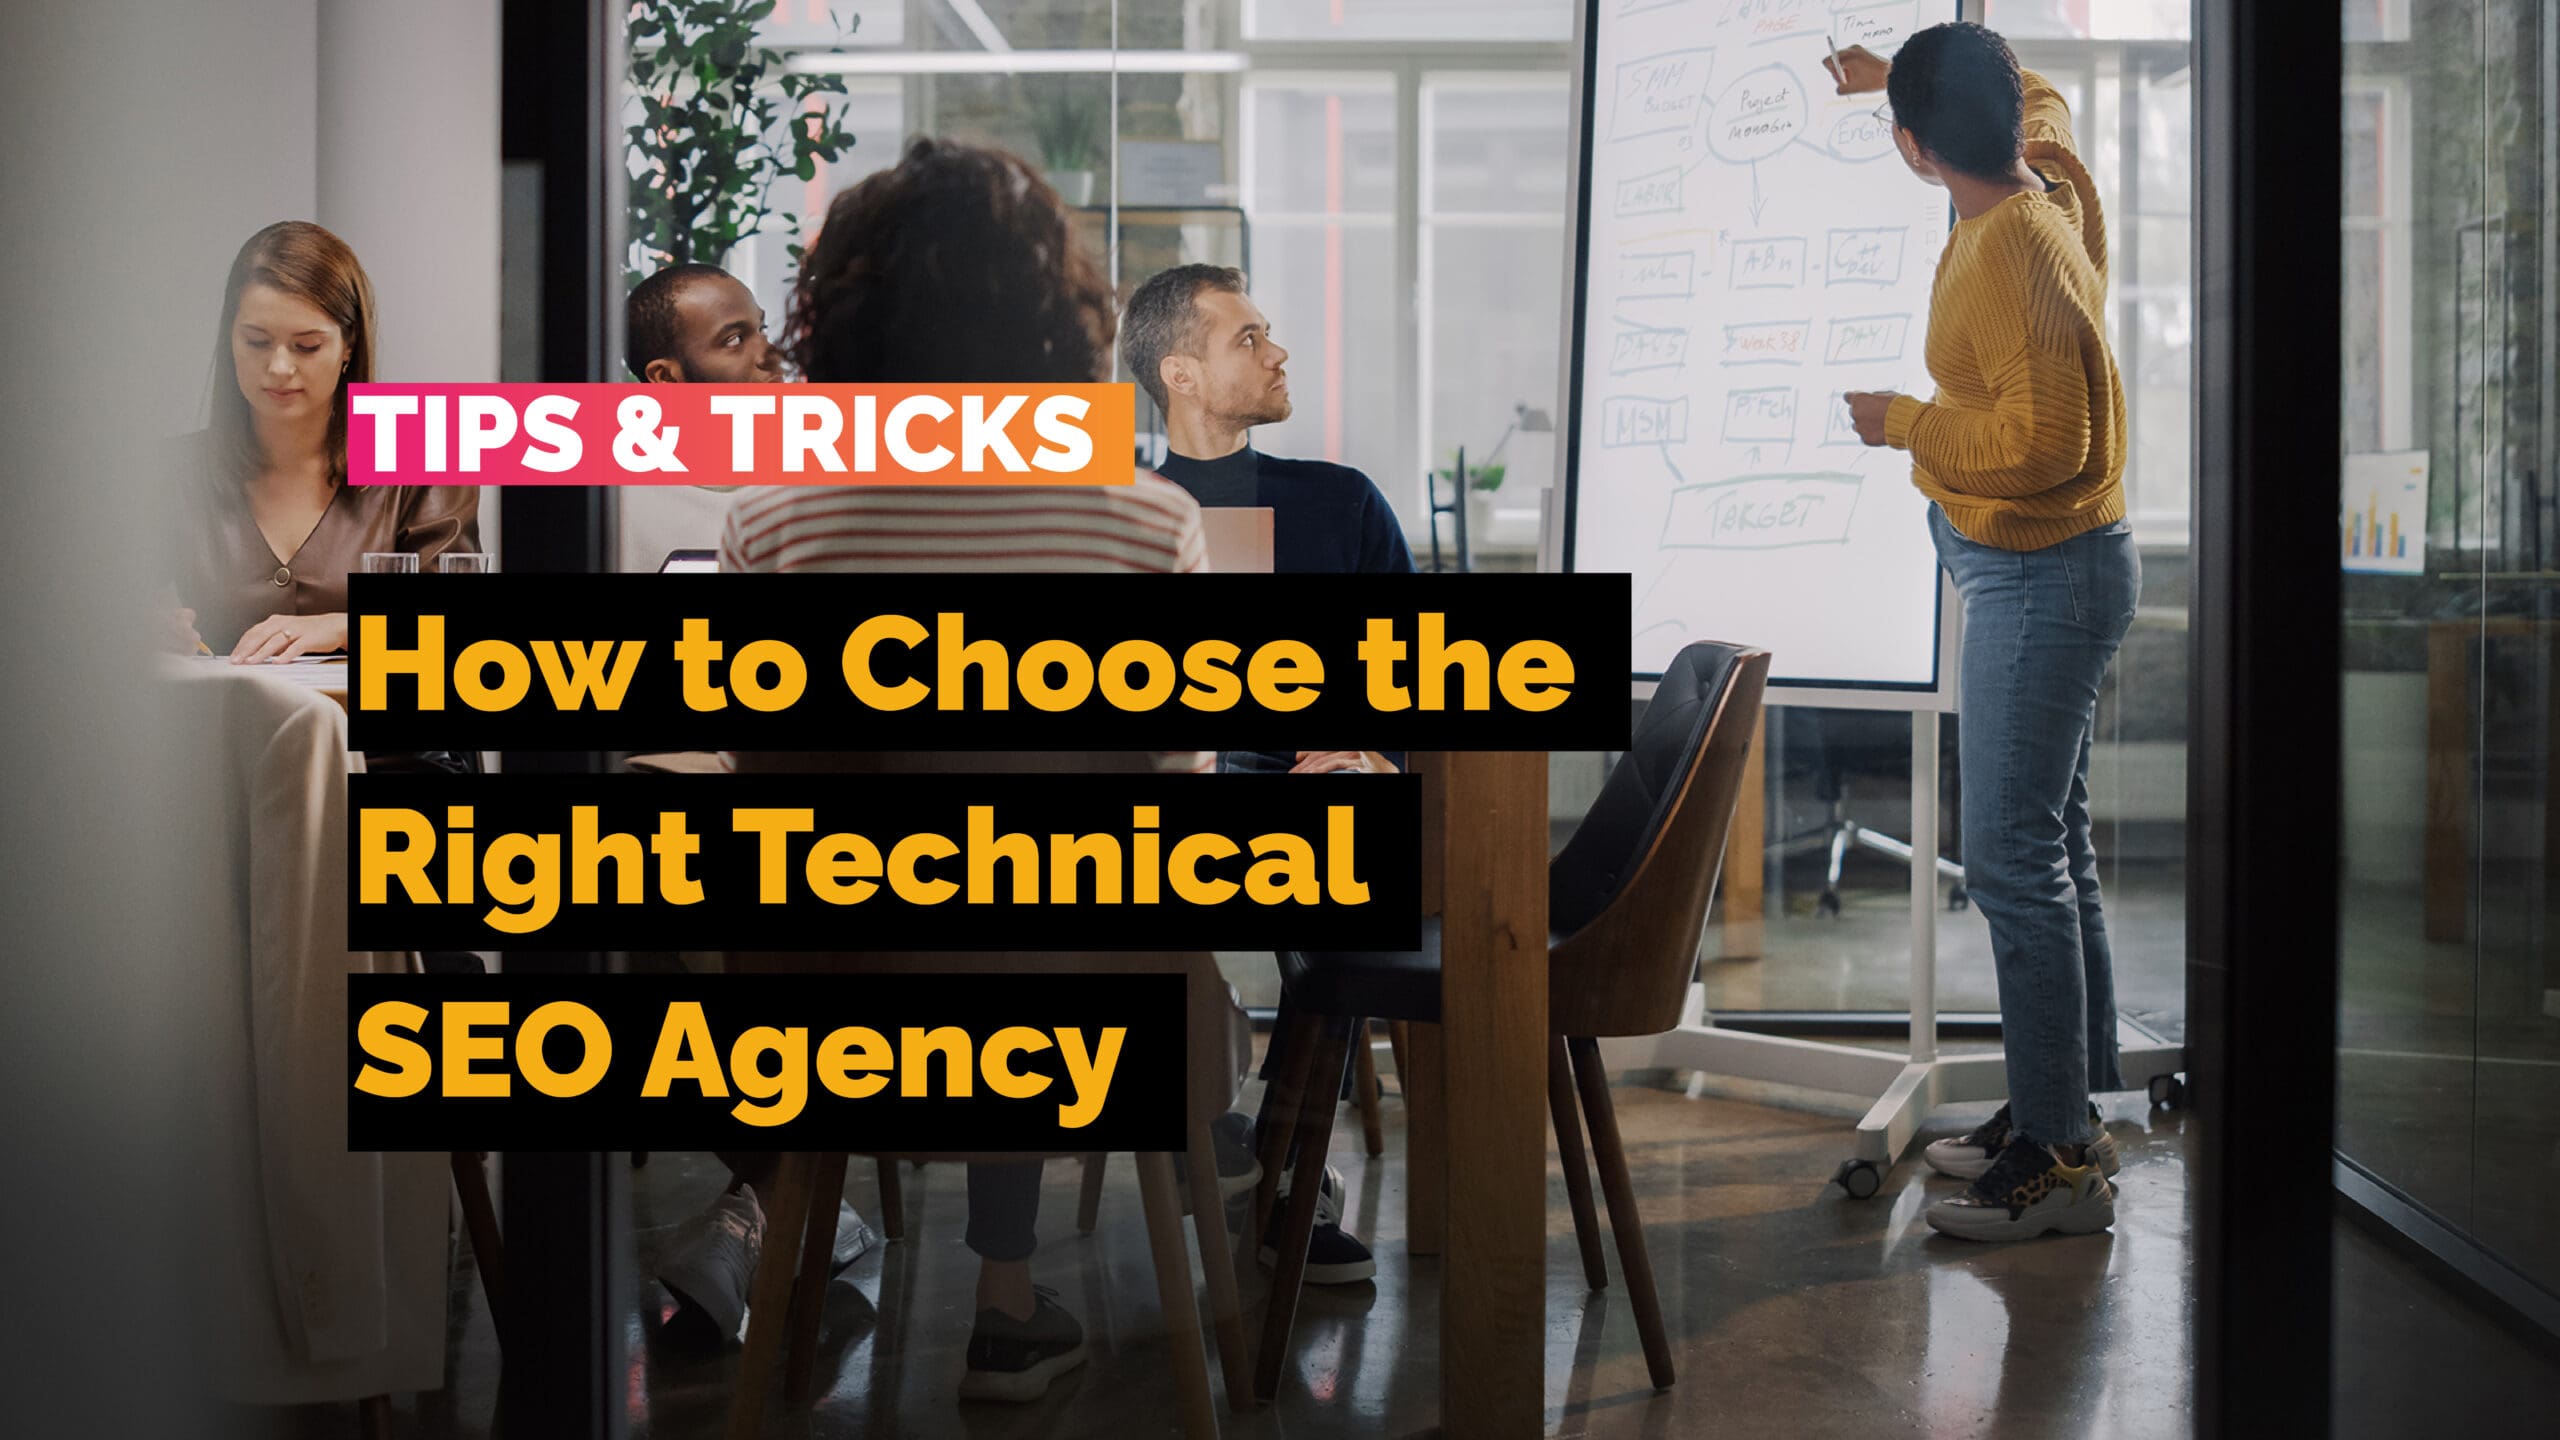 How to Choose the Right Technical SEO Agency: Tips & Tricks